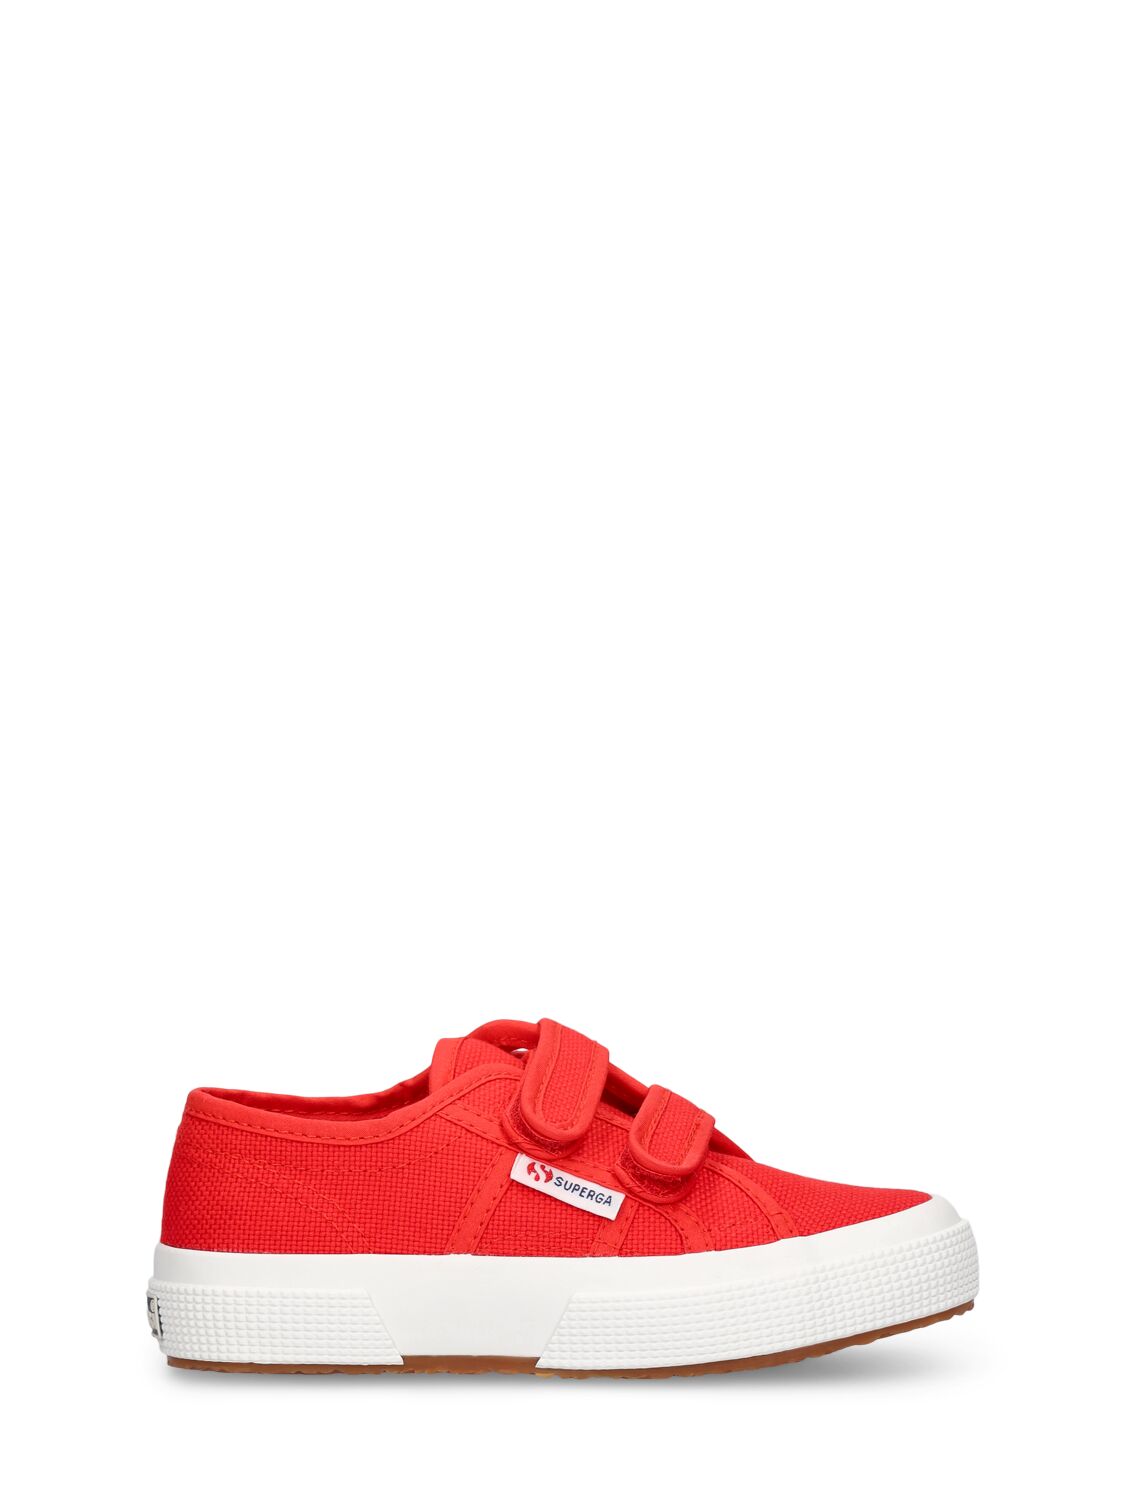 Superga Kids' 2750-cotjstrap Classic Canvas Sneakers In Red